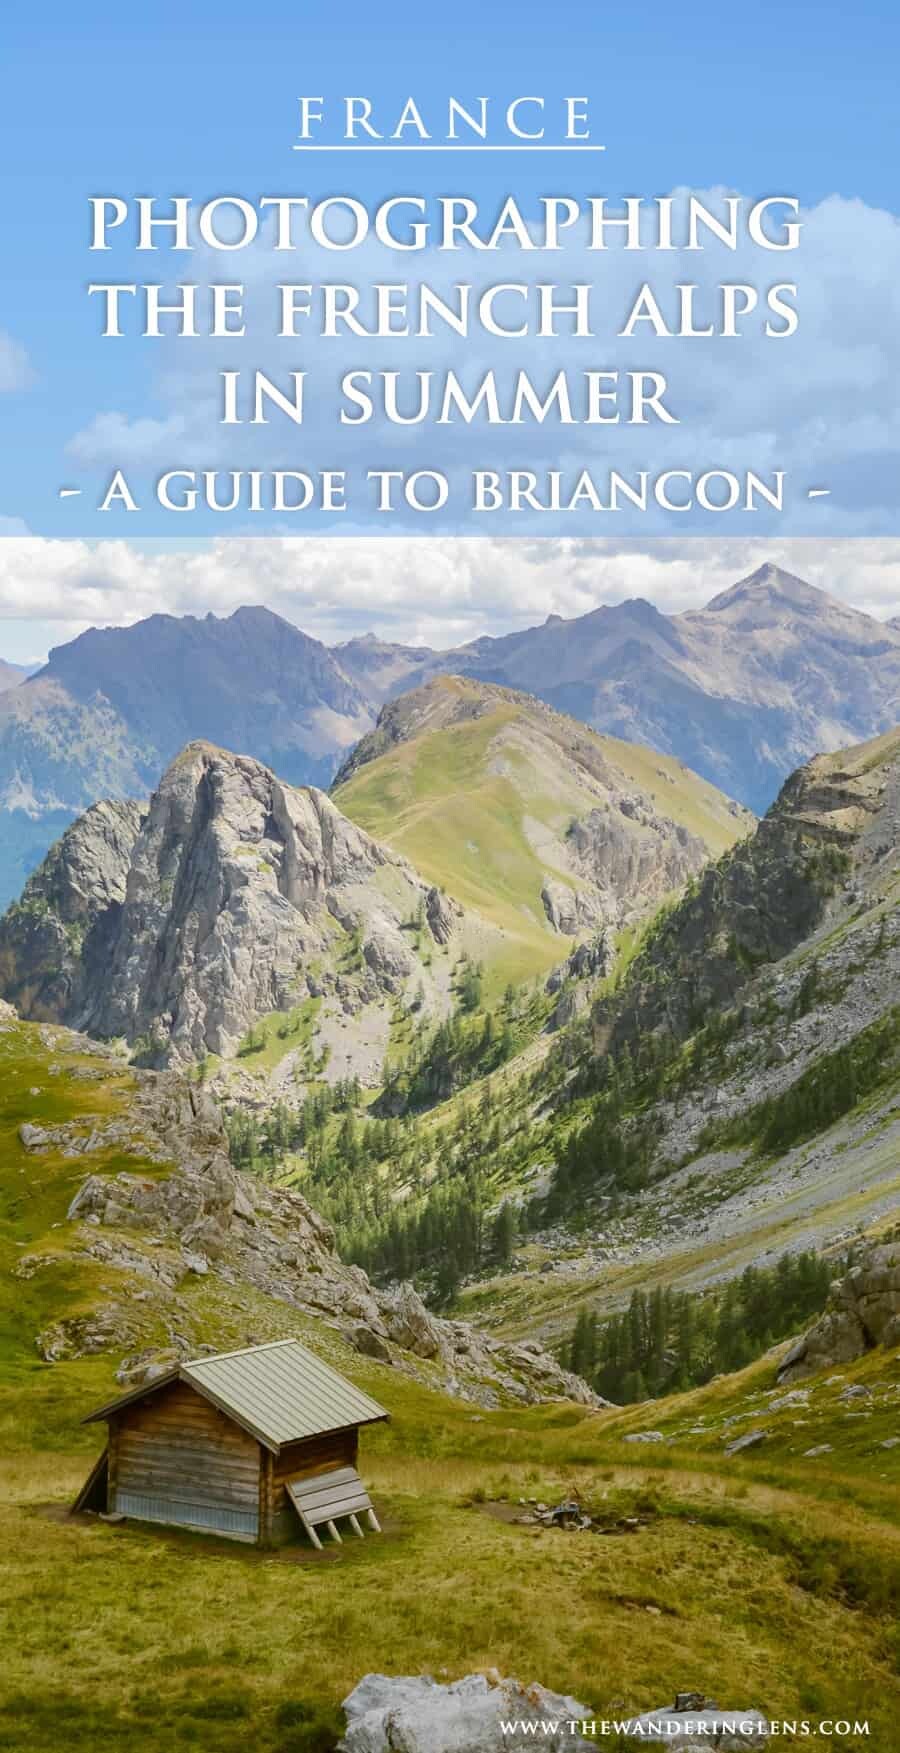 French Alps in Summer - A Guide to Photography Locations in Briancon, France